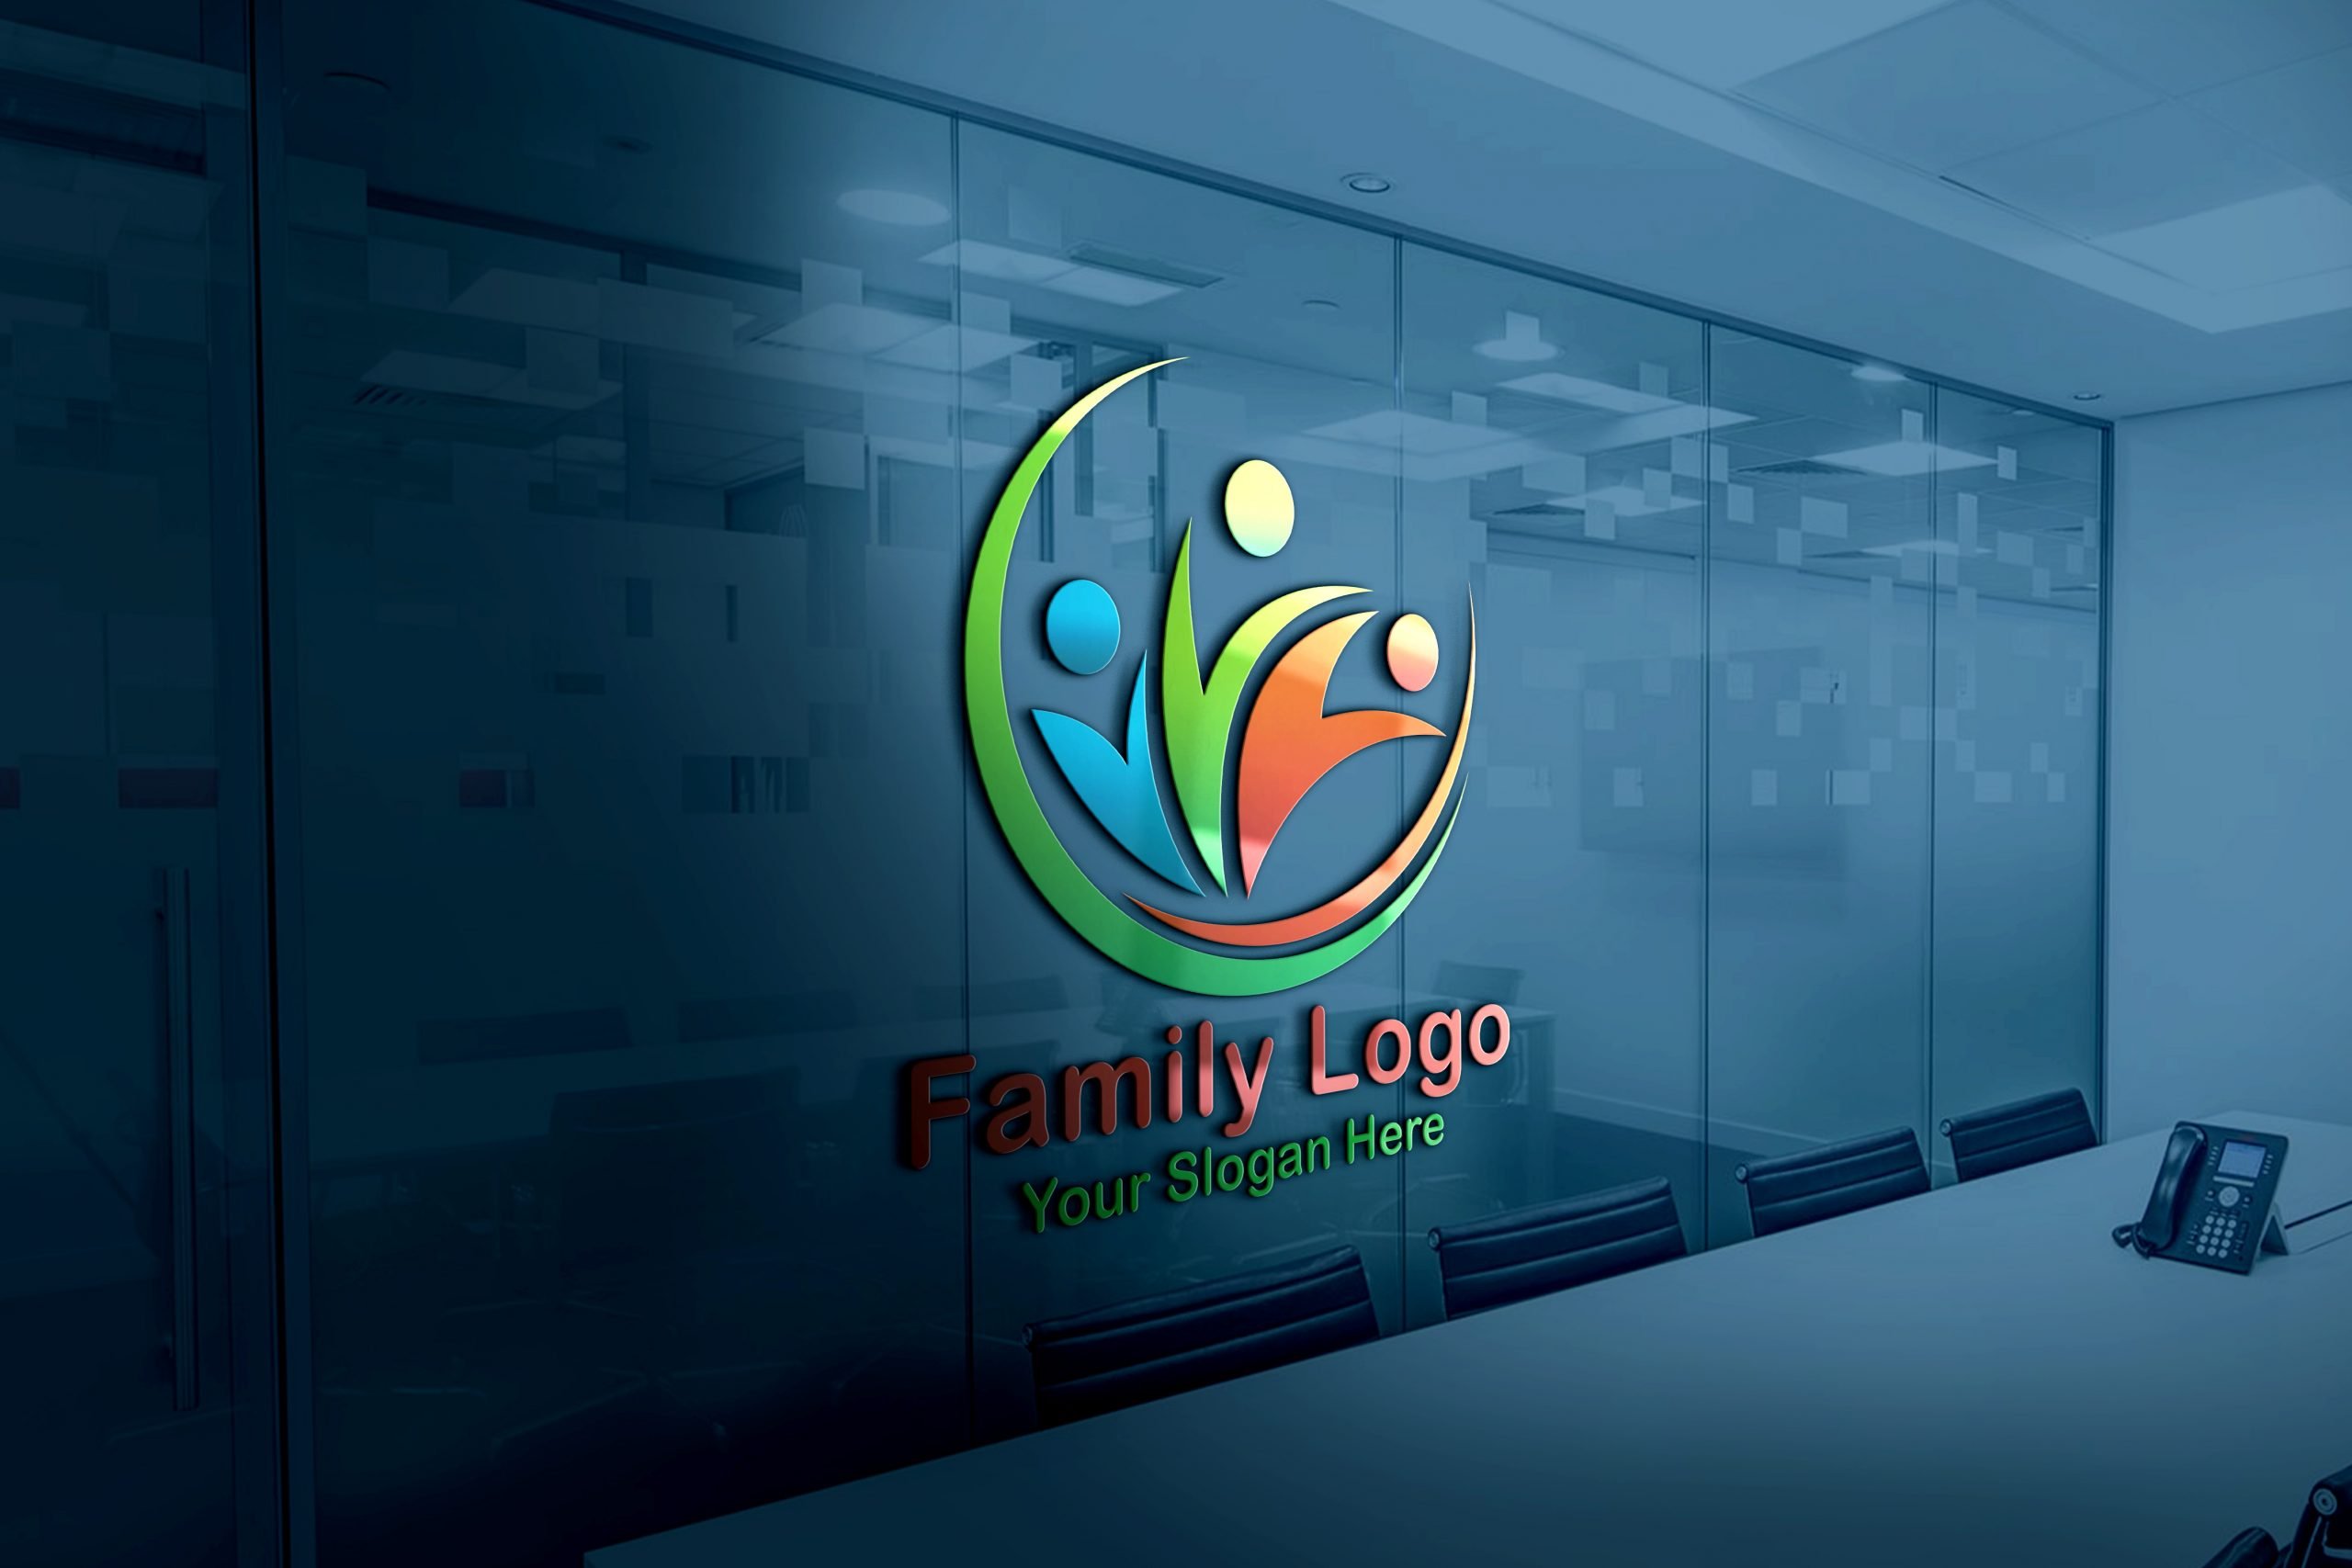 Logo Design Services at best price in Ahmedabad | ID: 2850507929333